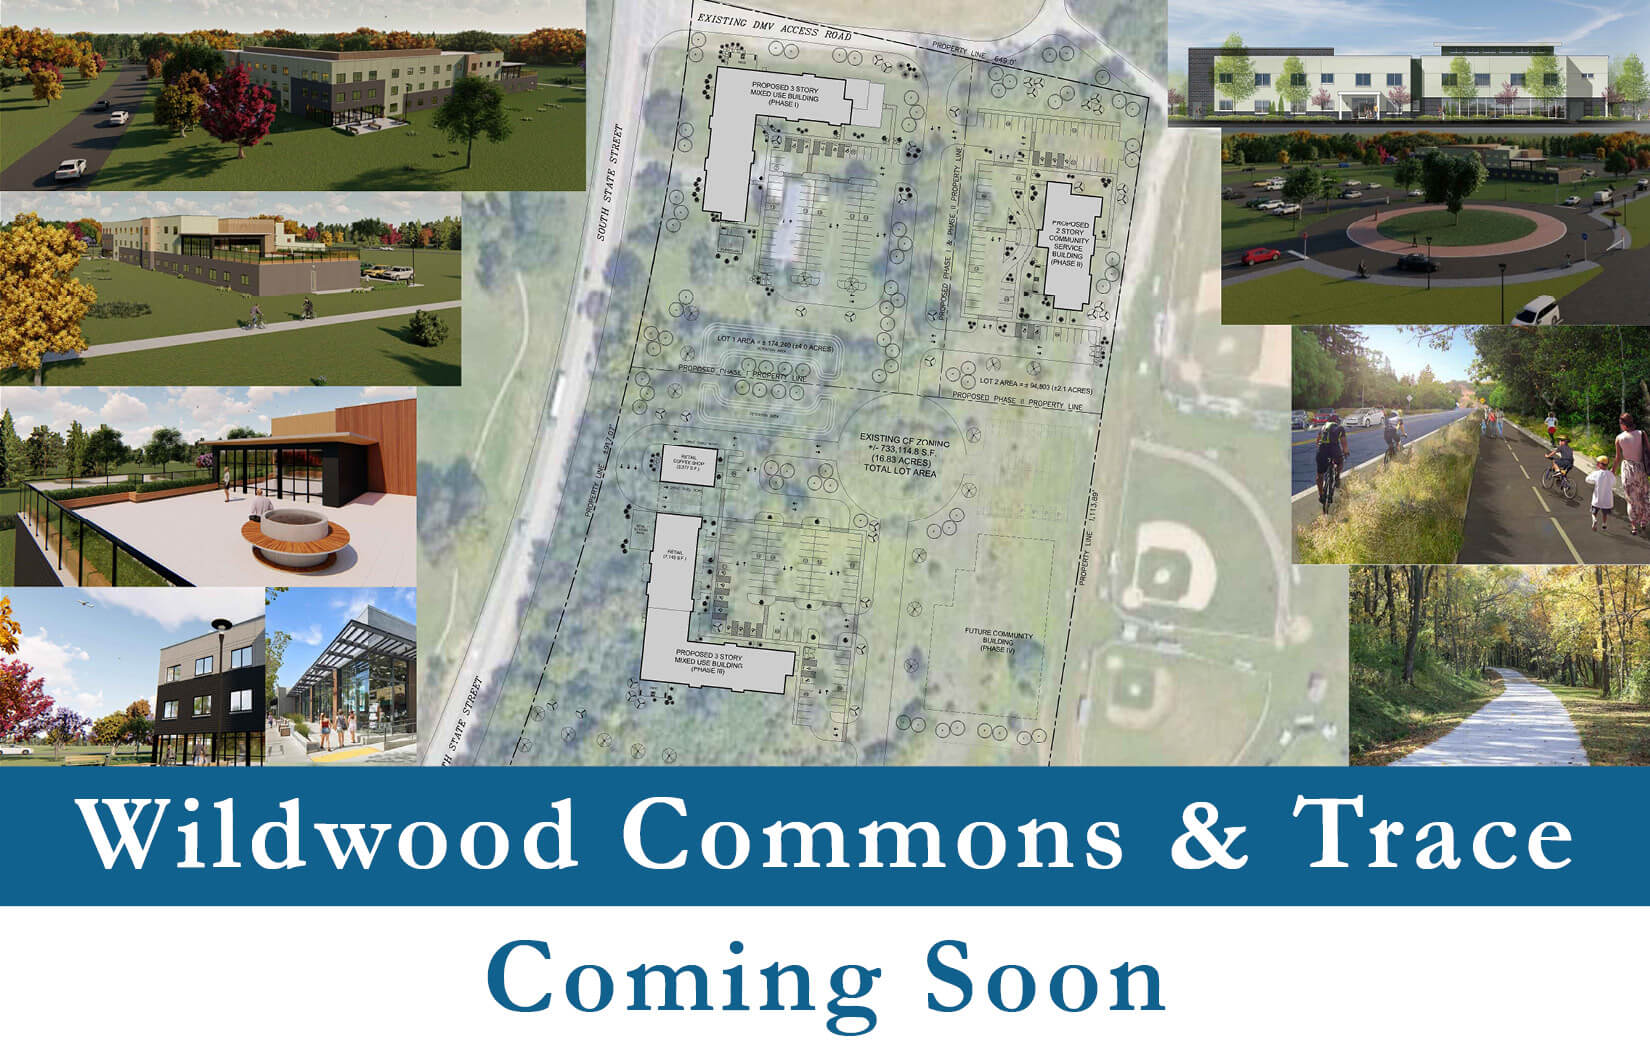 Wildwood Commons & Trace Coming Soon